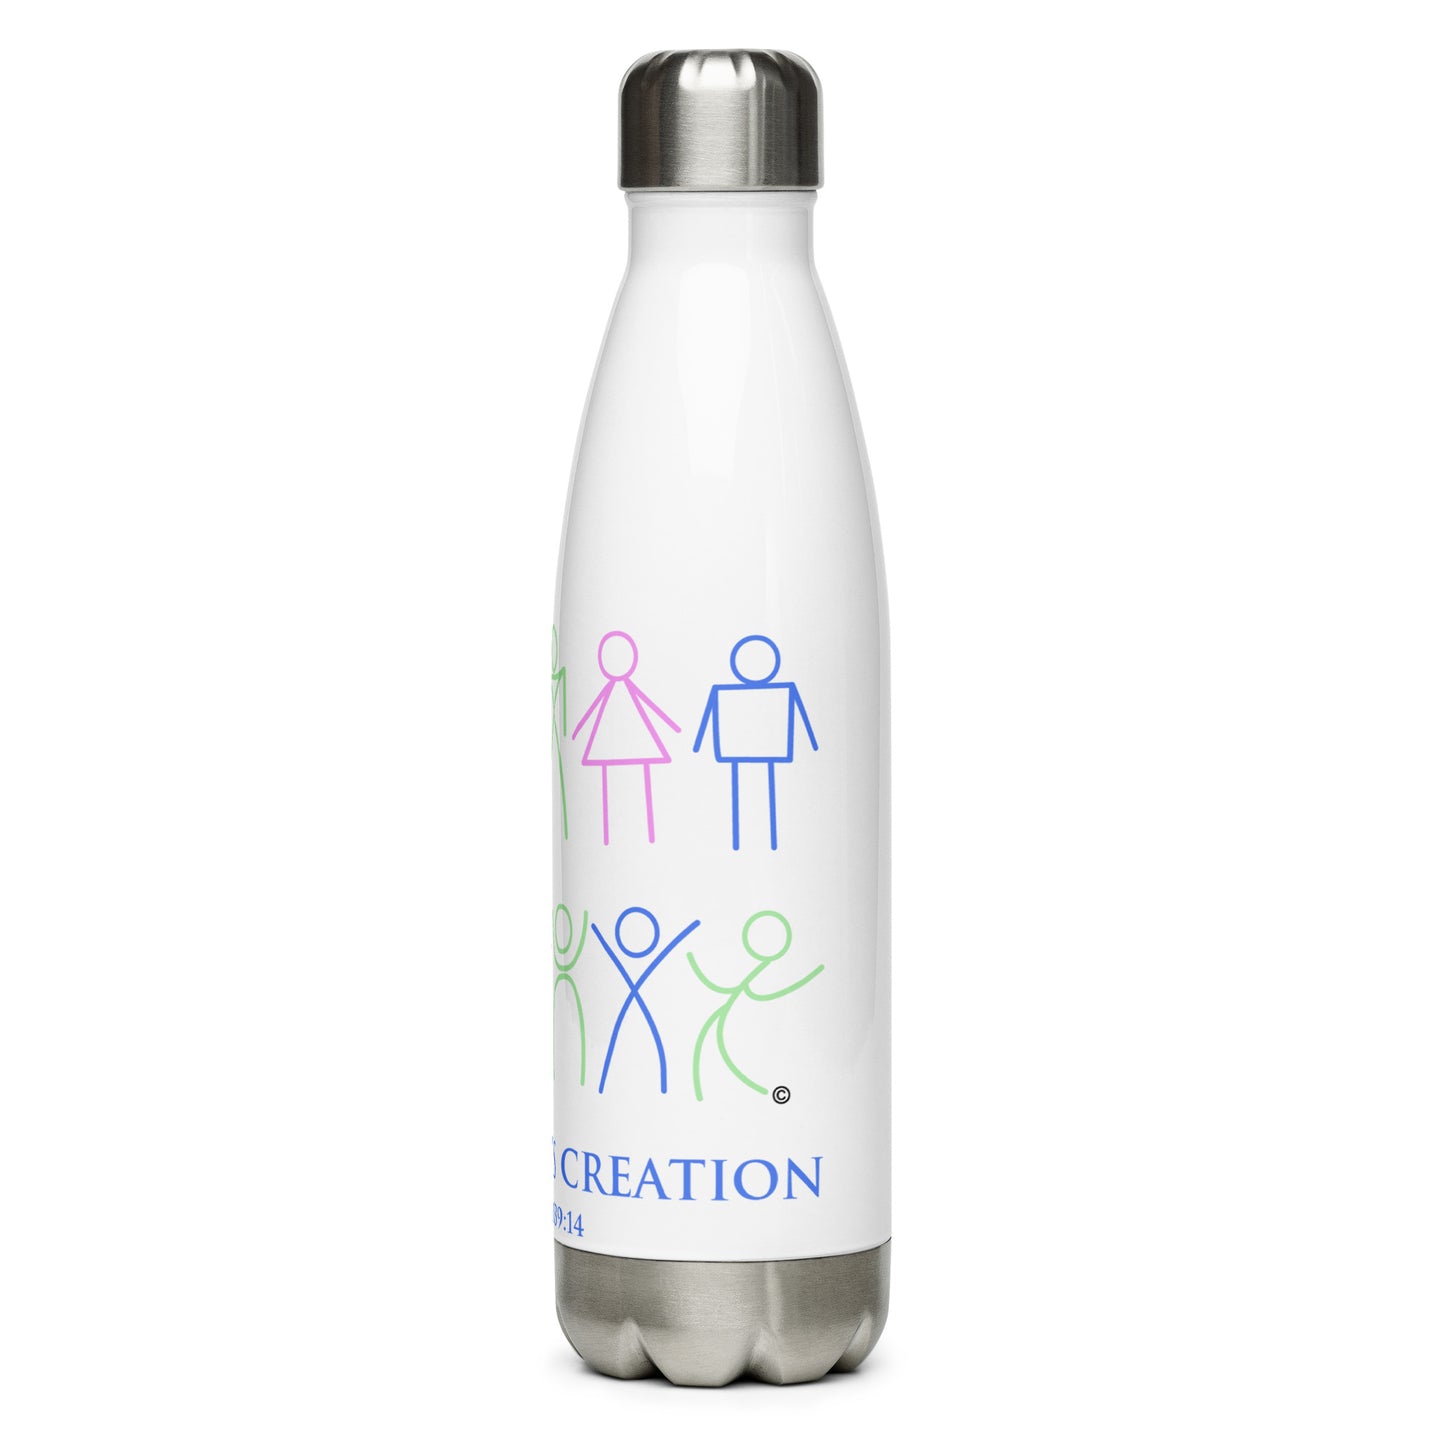 We Are God's Creation Stainless Steel Water Bottle